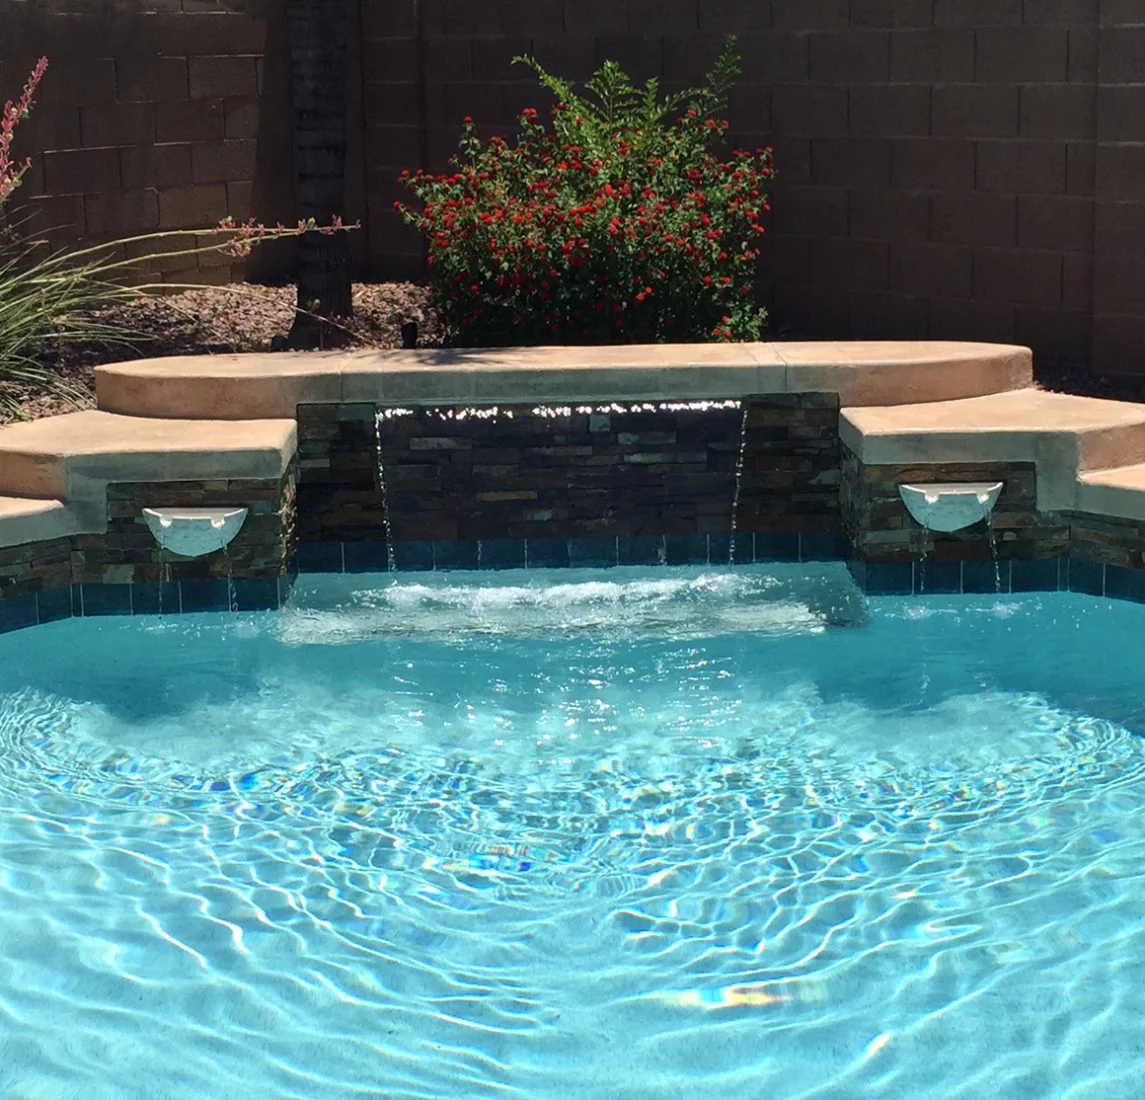 Pool water features and pool remodeling contractor Arizona